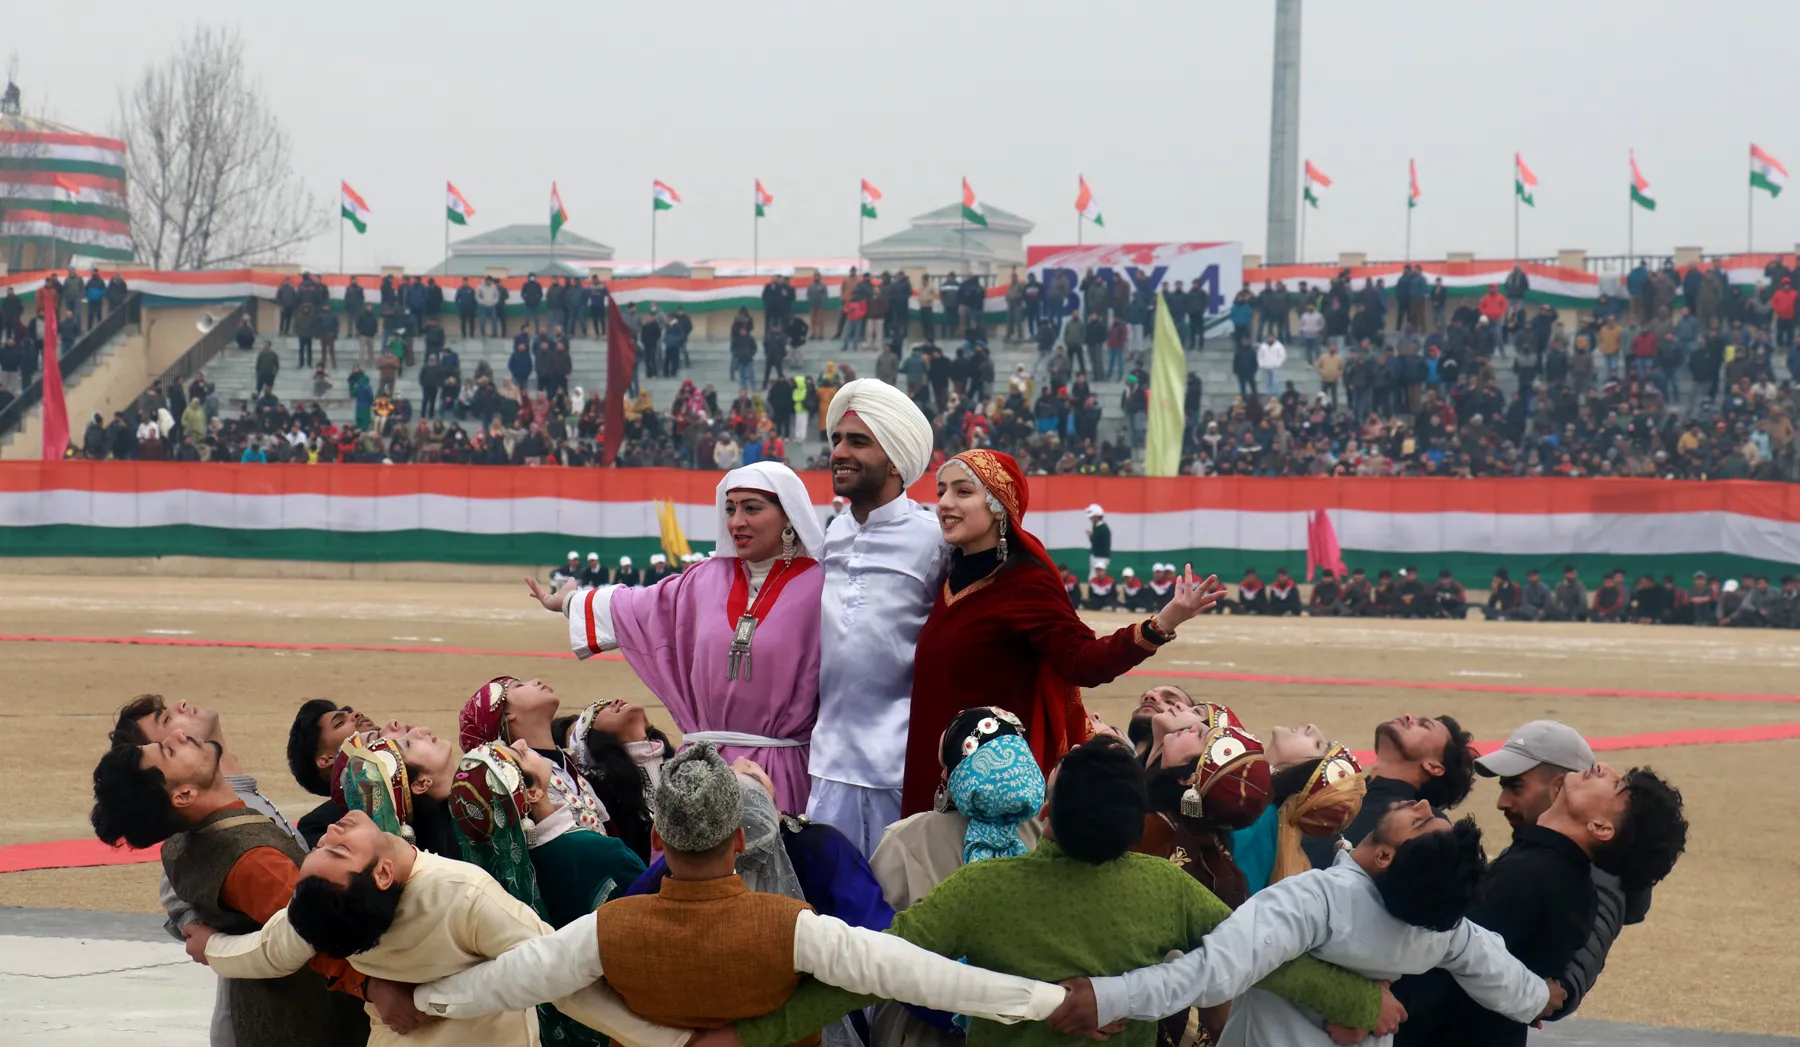 Young artists perform during the Republic Day function at Bakshi stadium in Srinagar on Friday. Mubashir Khan for Greater Kashmir